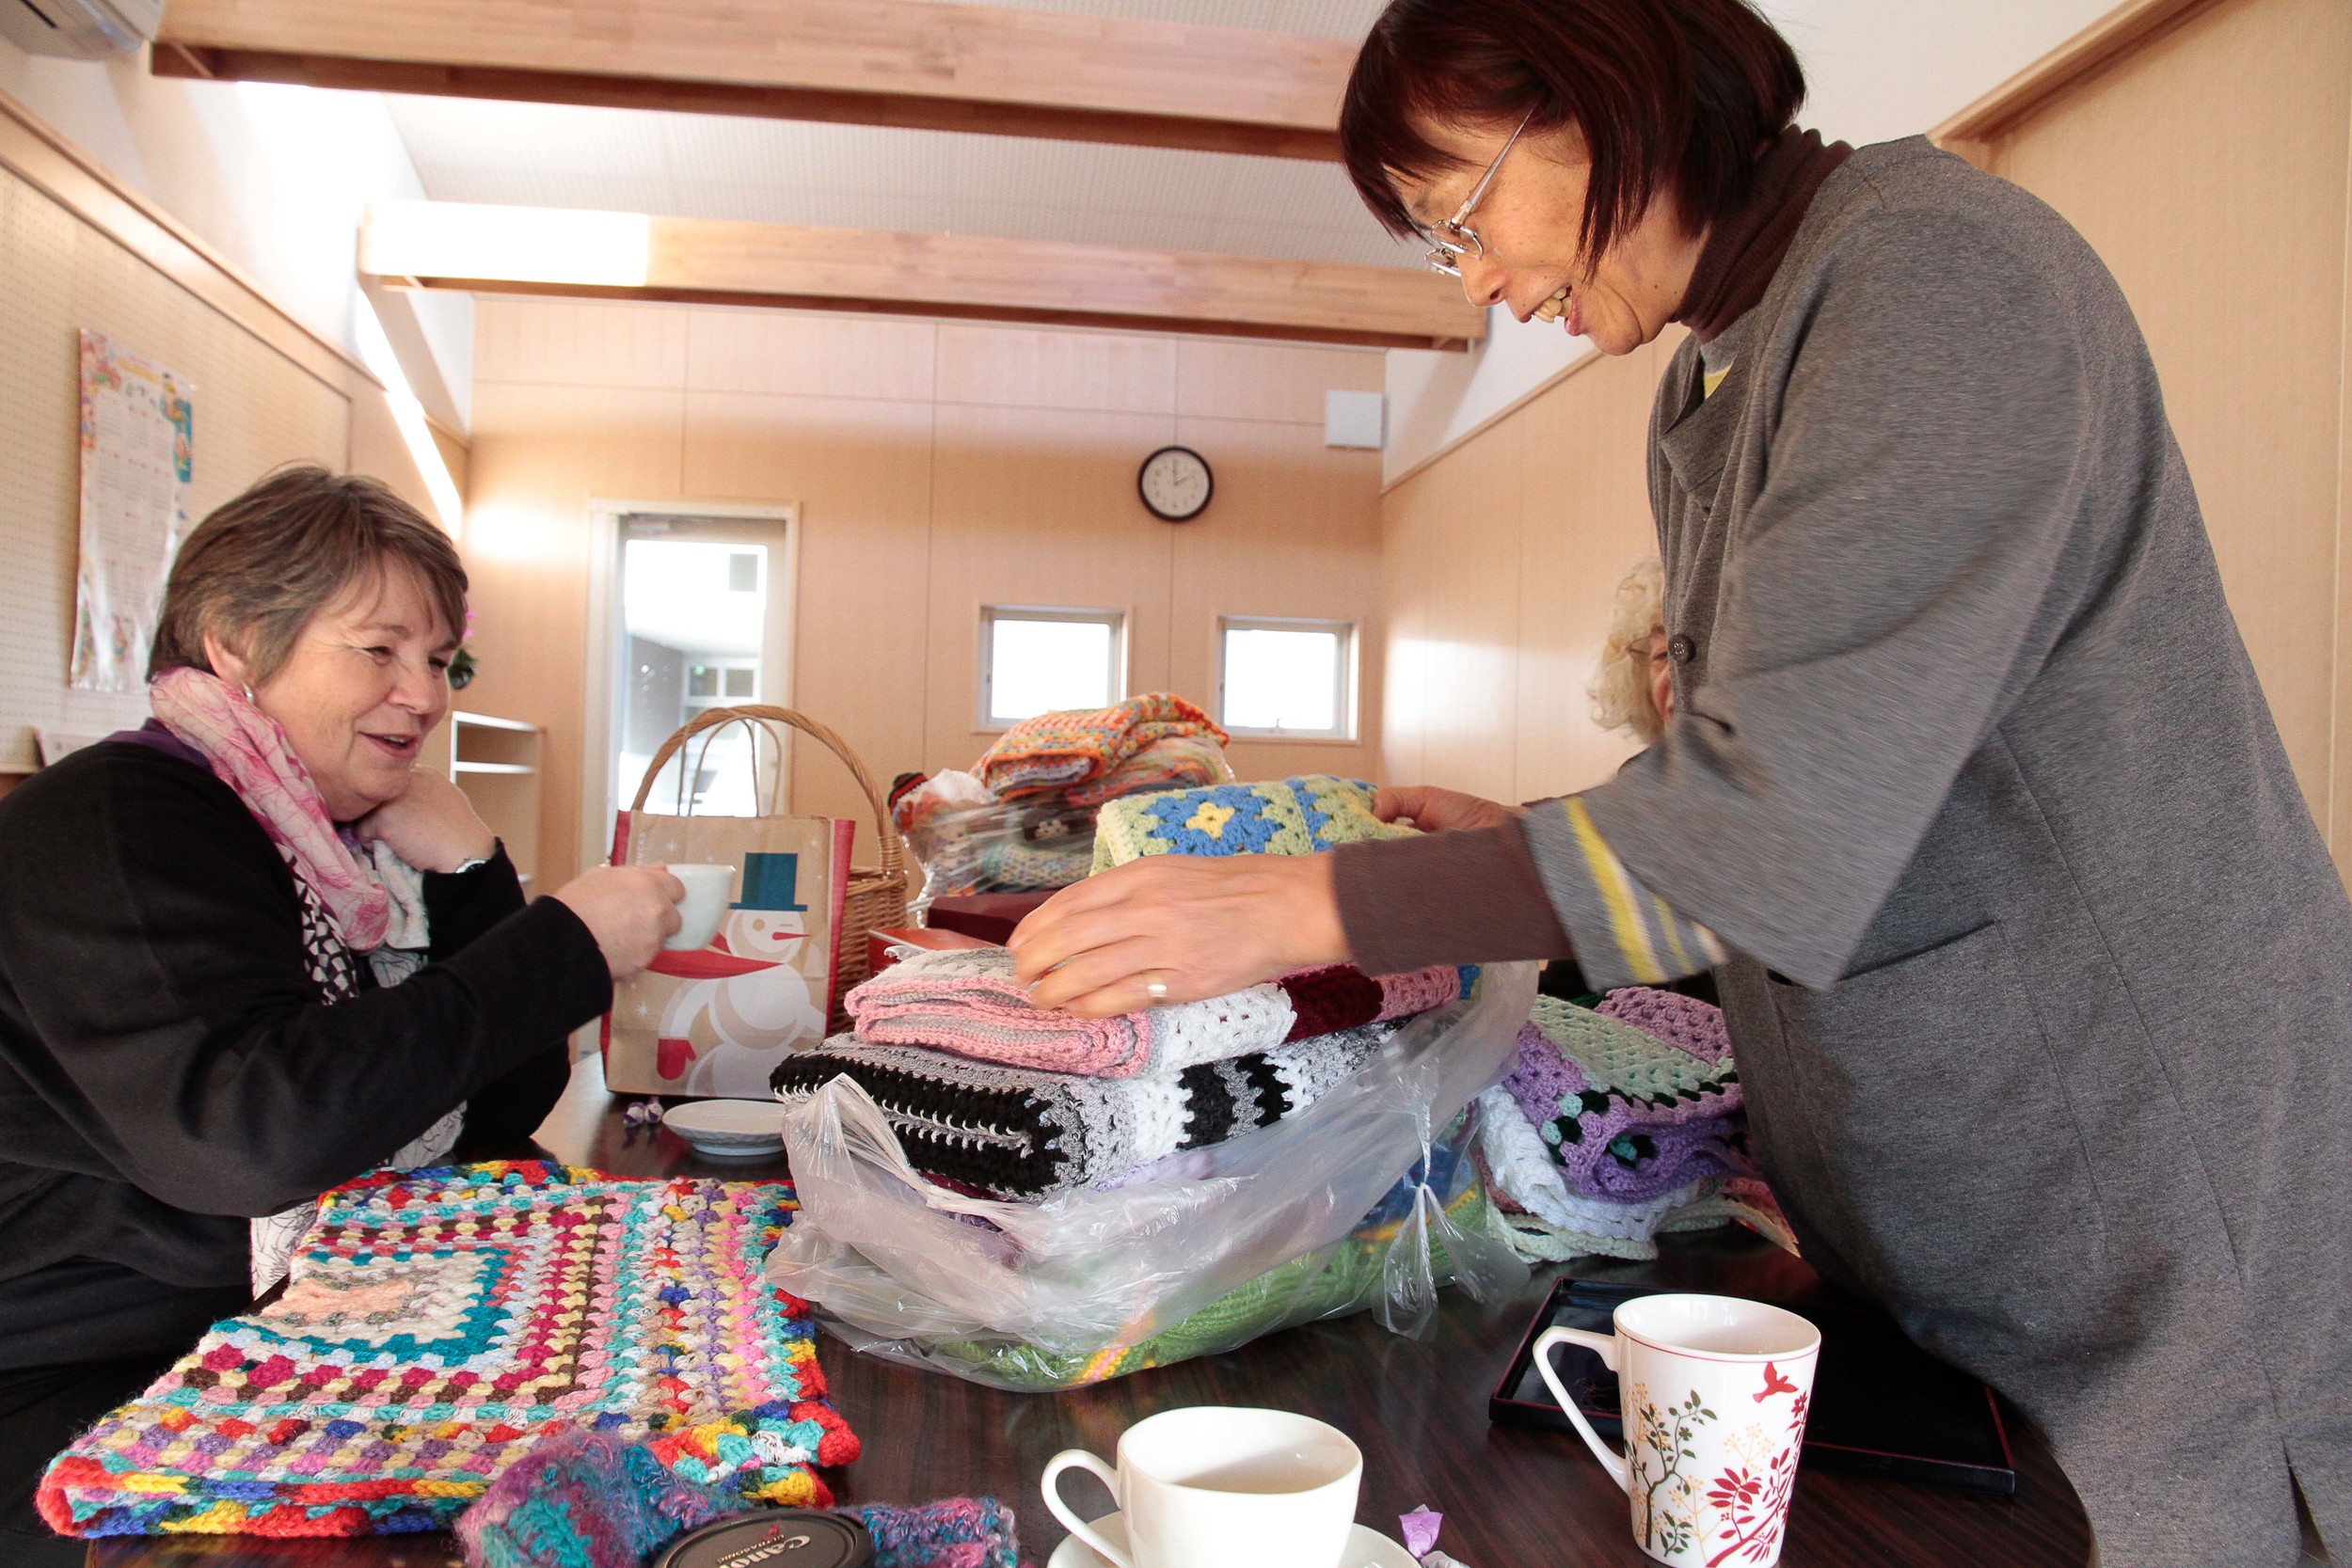 Mrs Utsumi, founder of the Mother's Home, looking at all the beautiful blankets.